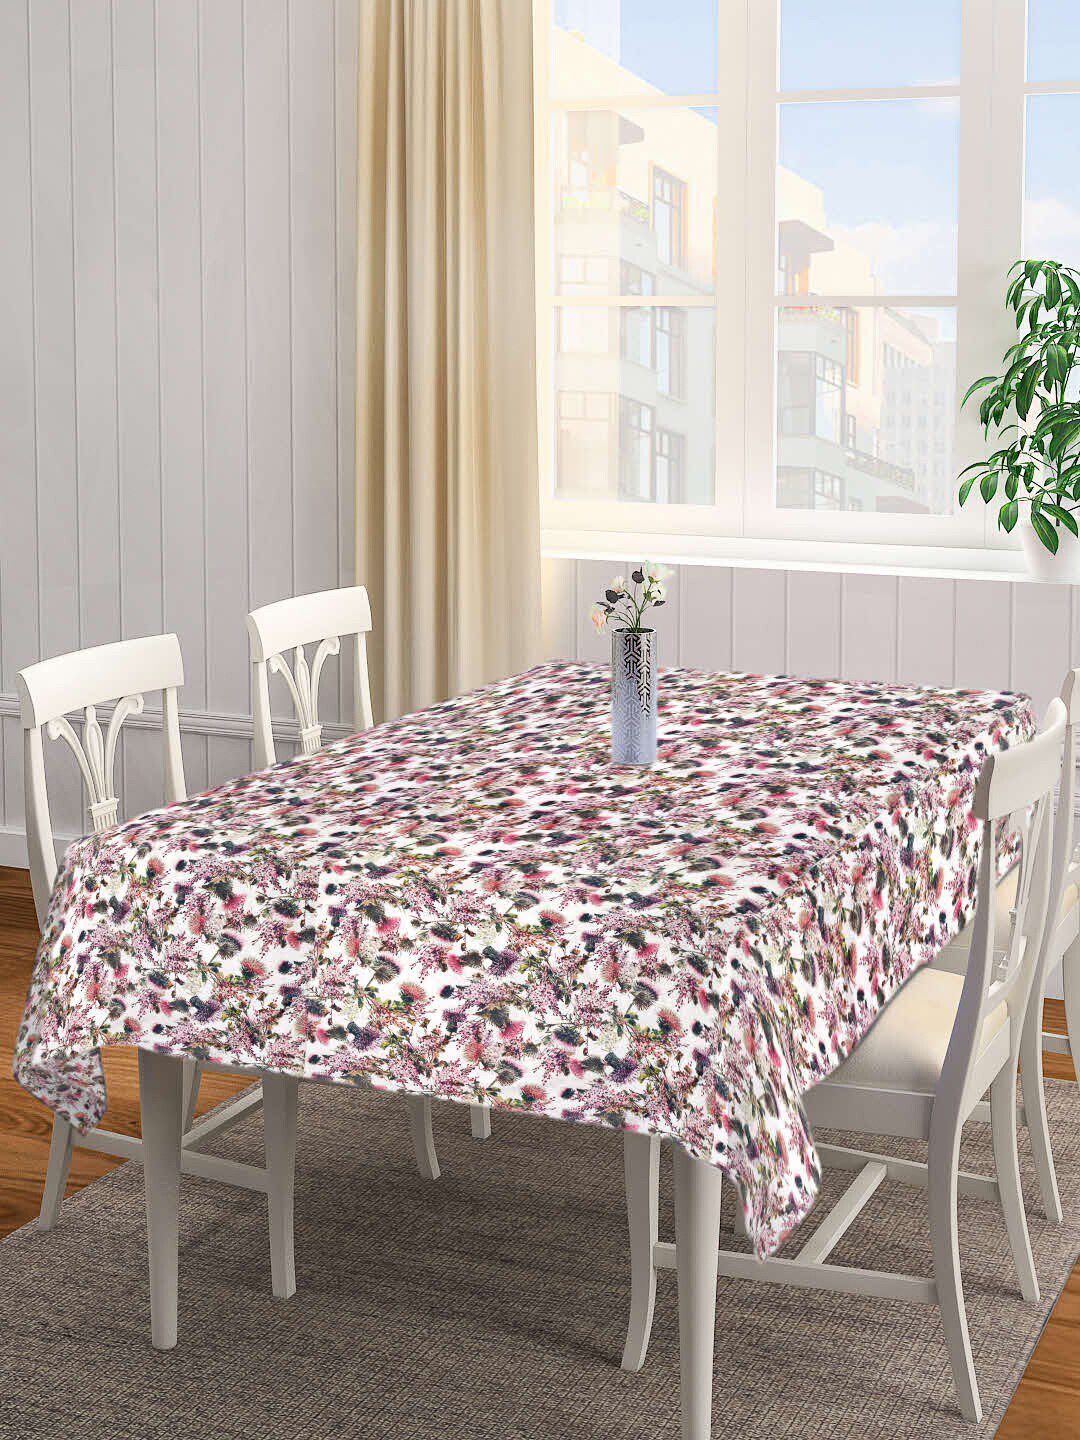 KLOTTHE White & Maroon Printed 6-Seater Rectangular Cotton Table Cover Price in India